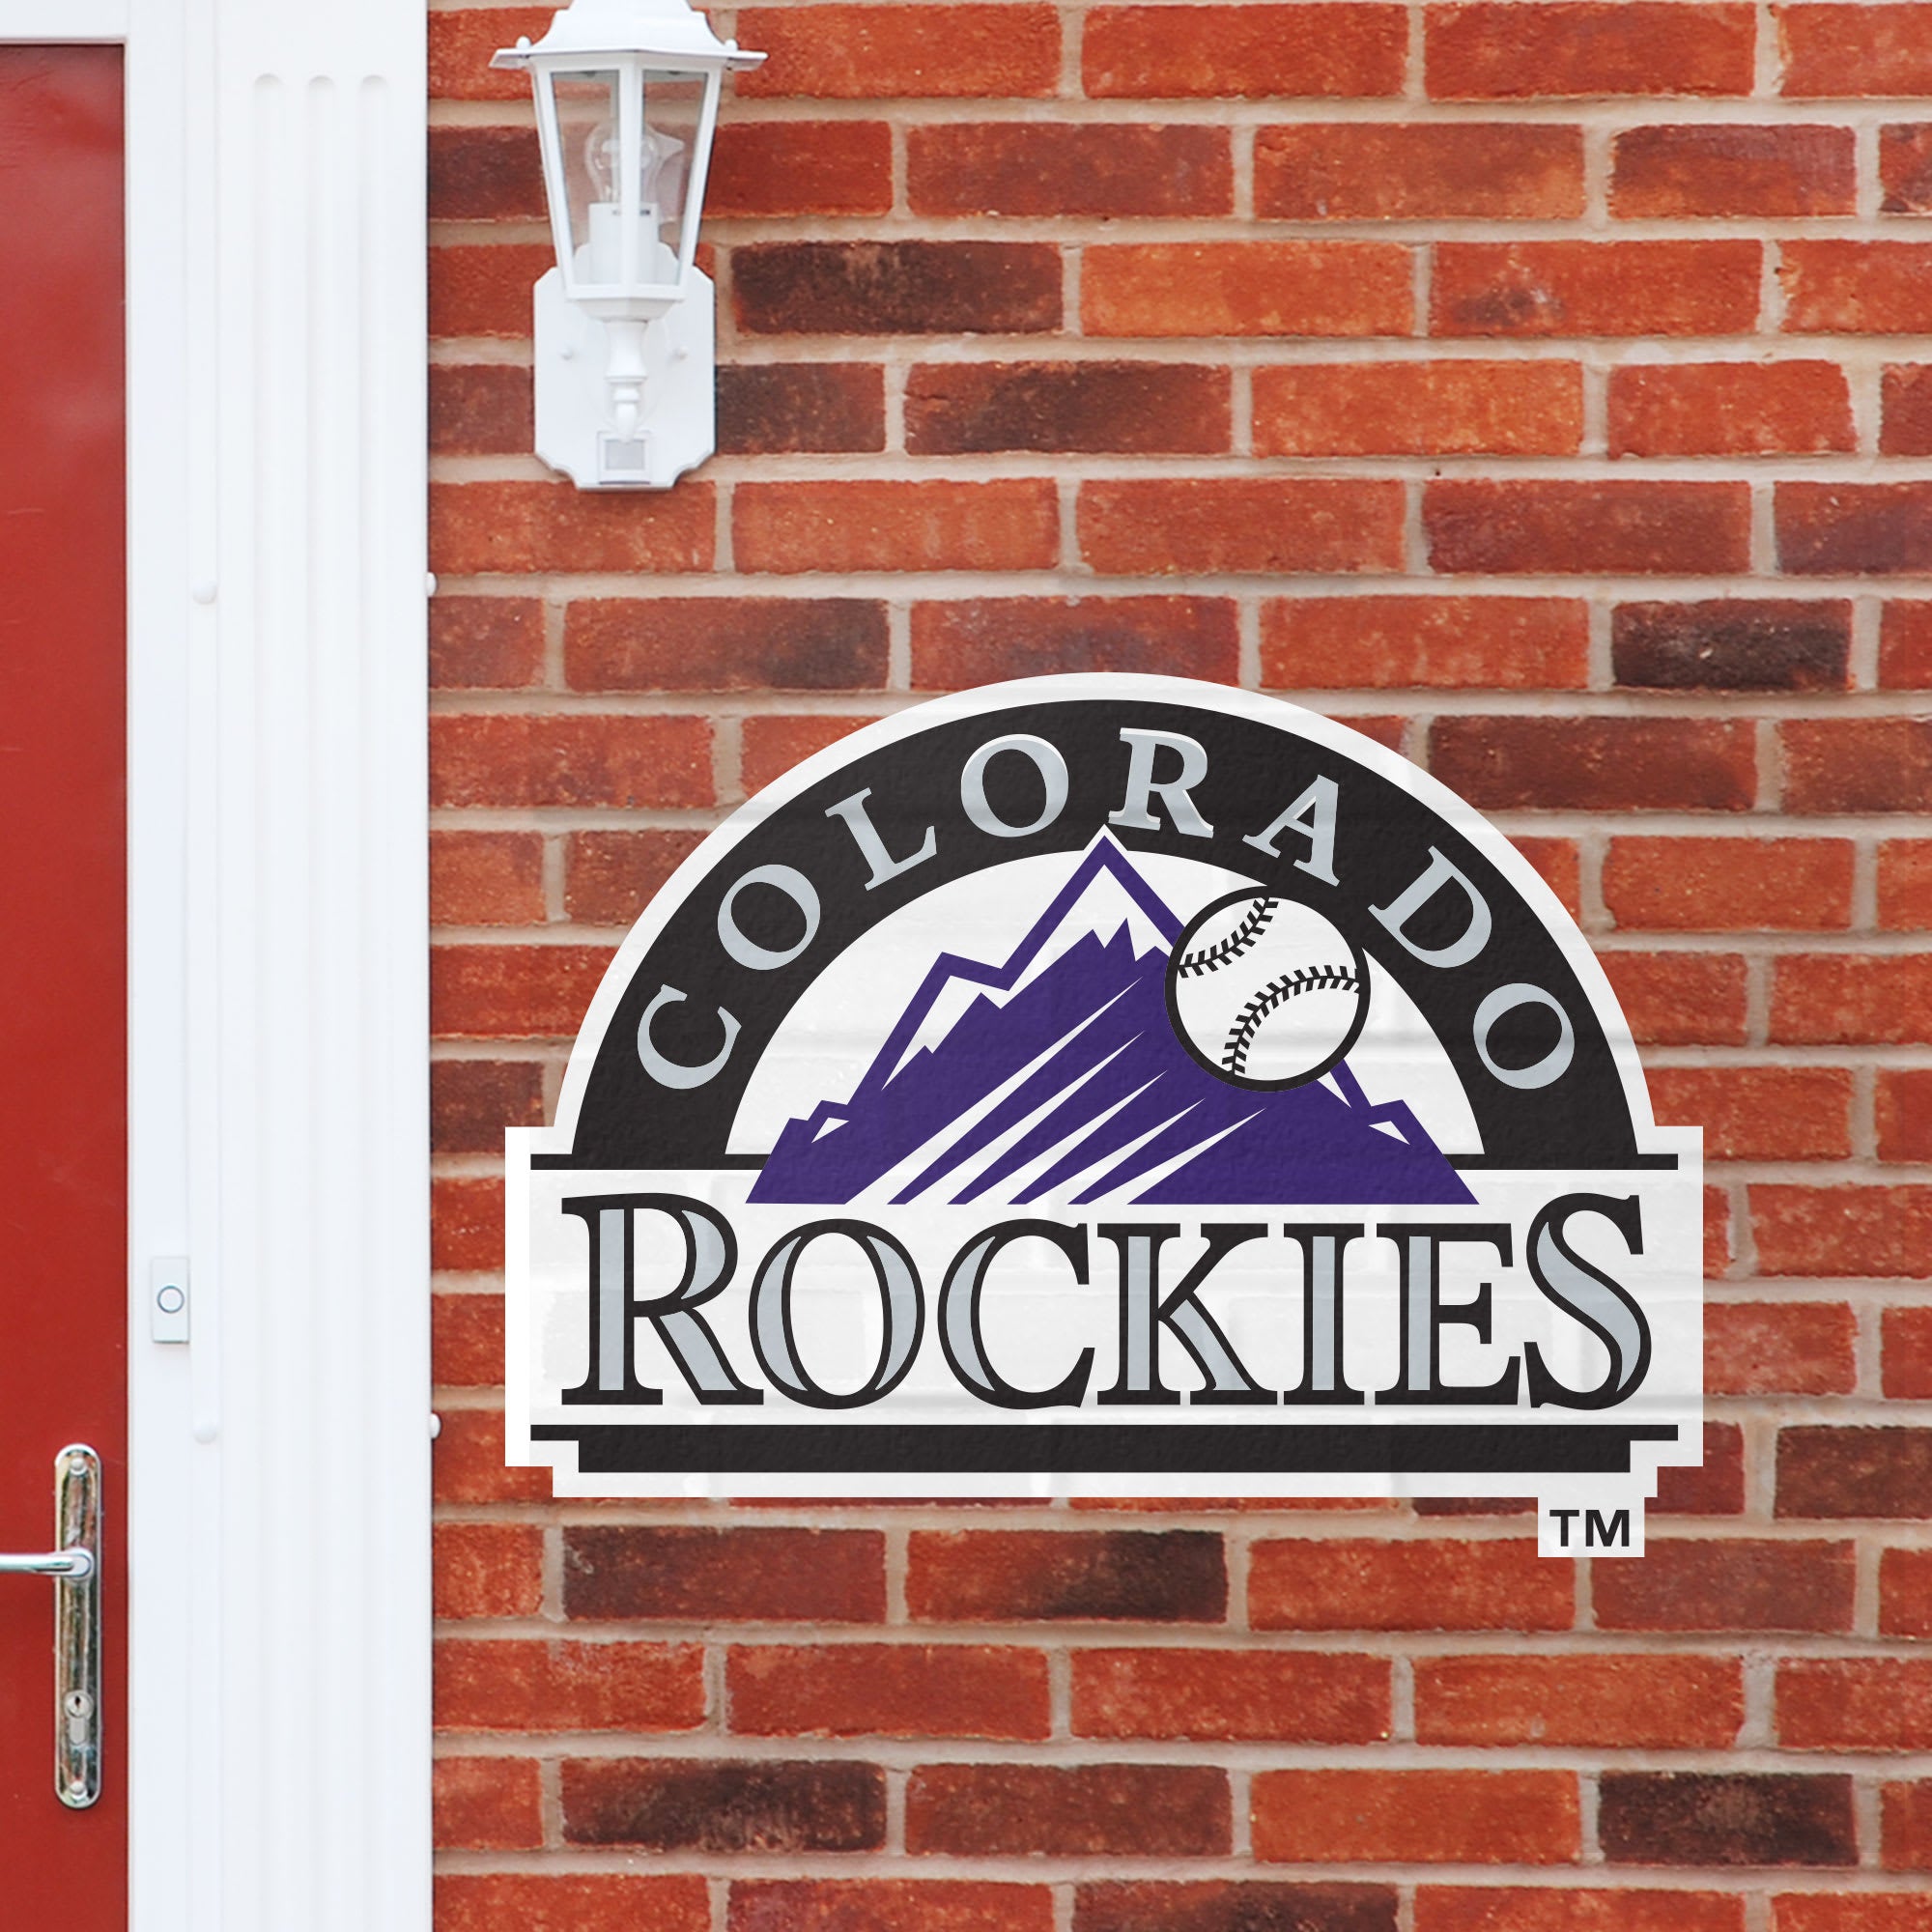 Colorado Rockies: Logo - Officially Licensed MLB Outdoor Graphic Giant Logo (30"W x 30"H) by Fathead | Wood/Aluminum